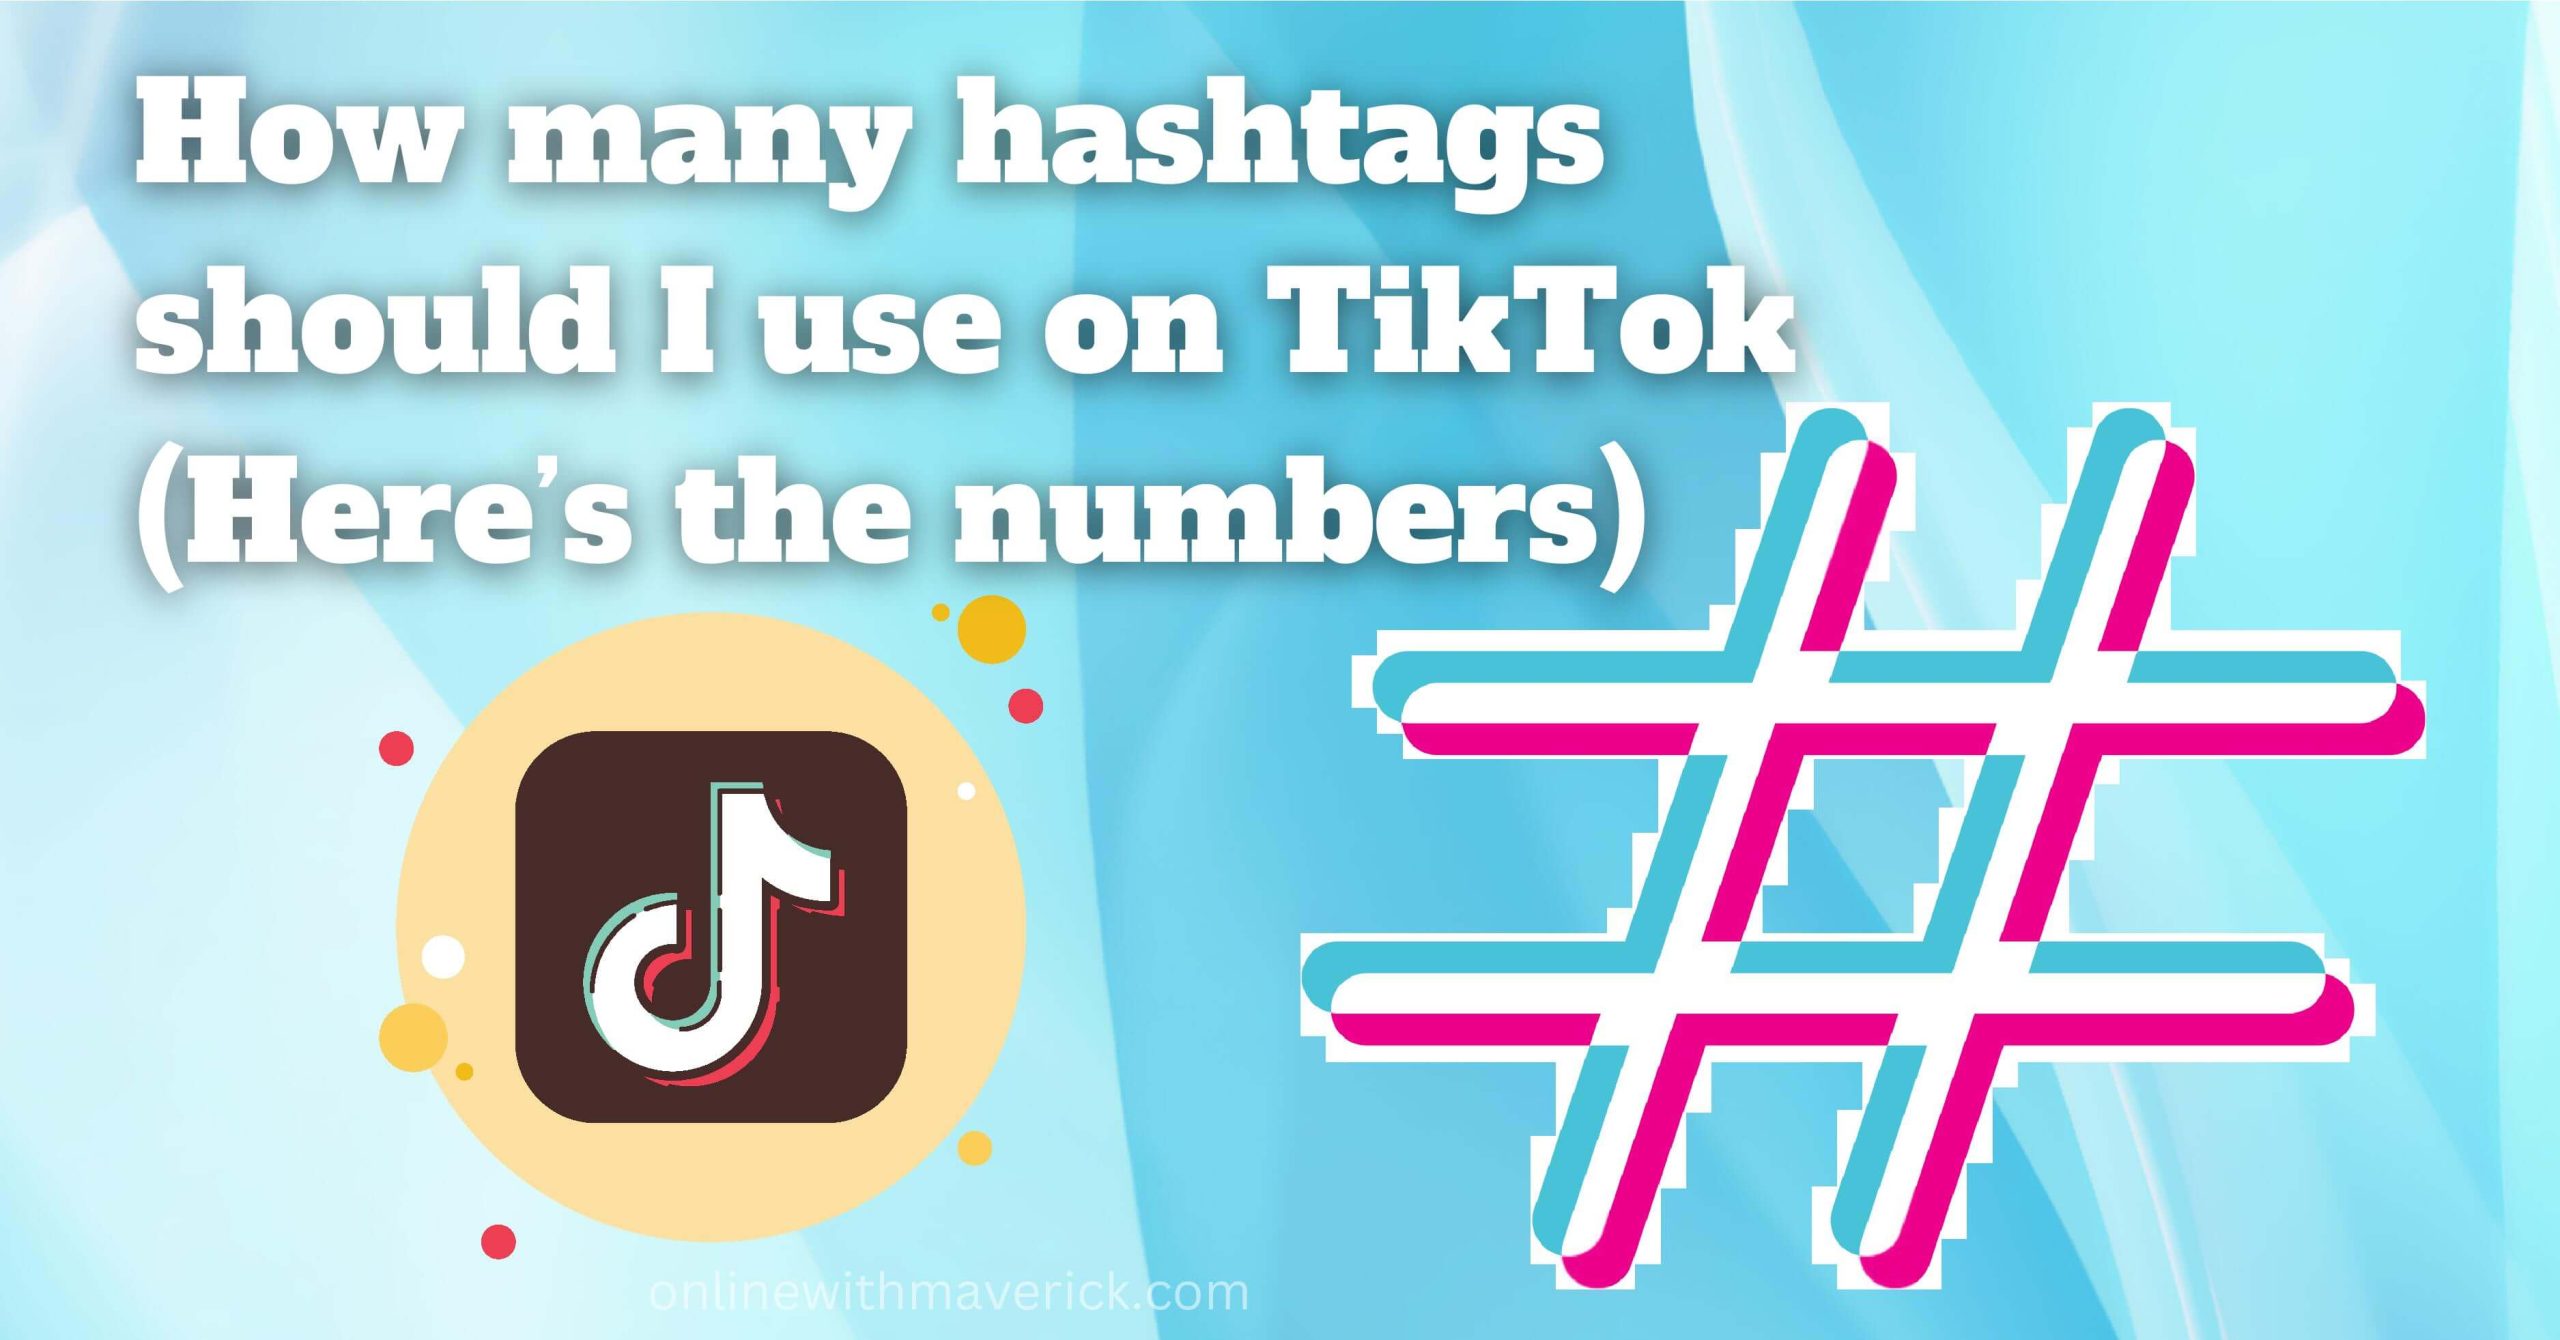 How many hashtags should I use on TikTok (Here's the numbers)